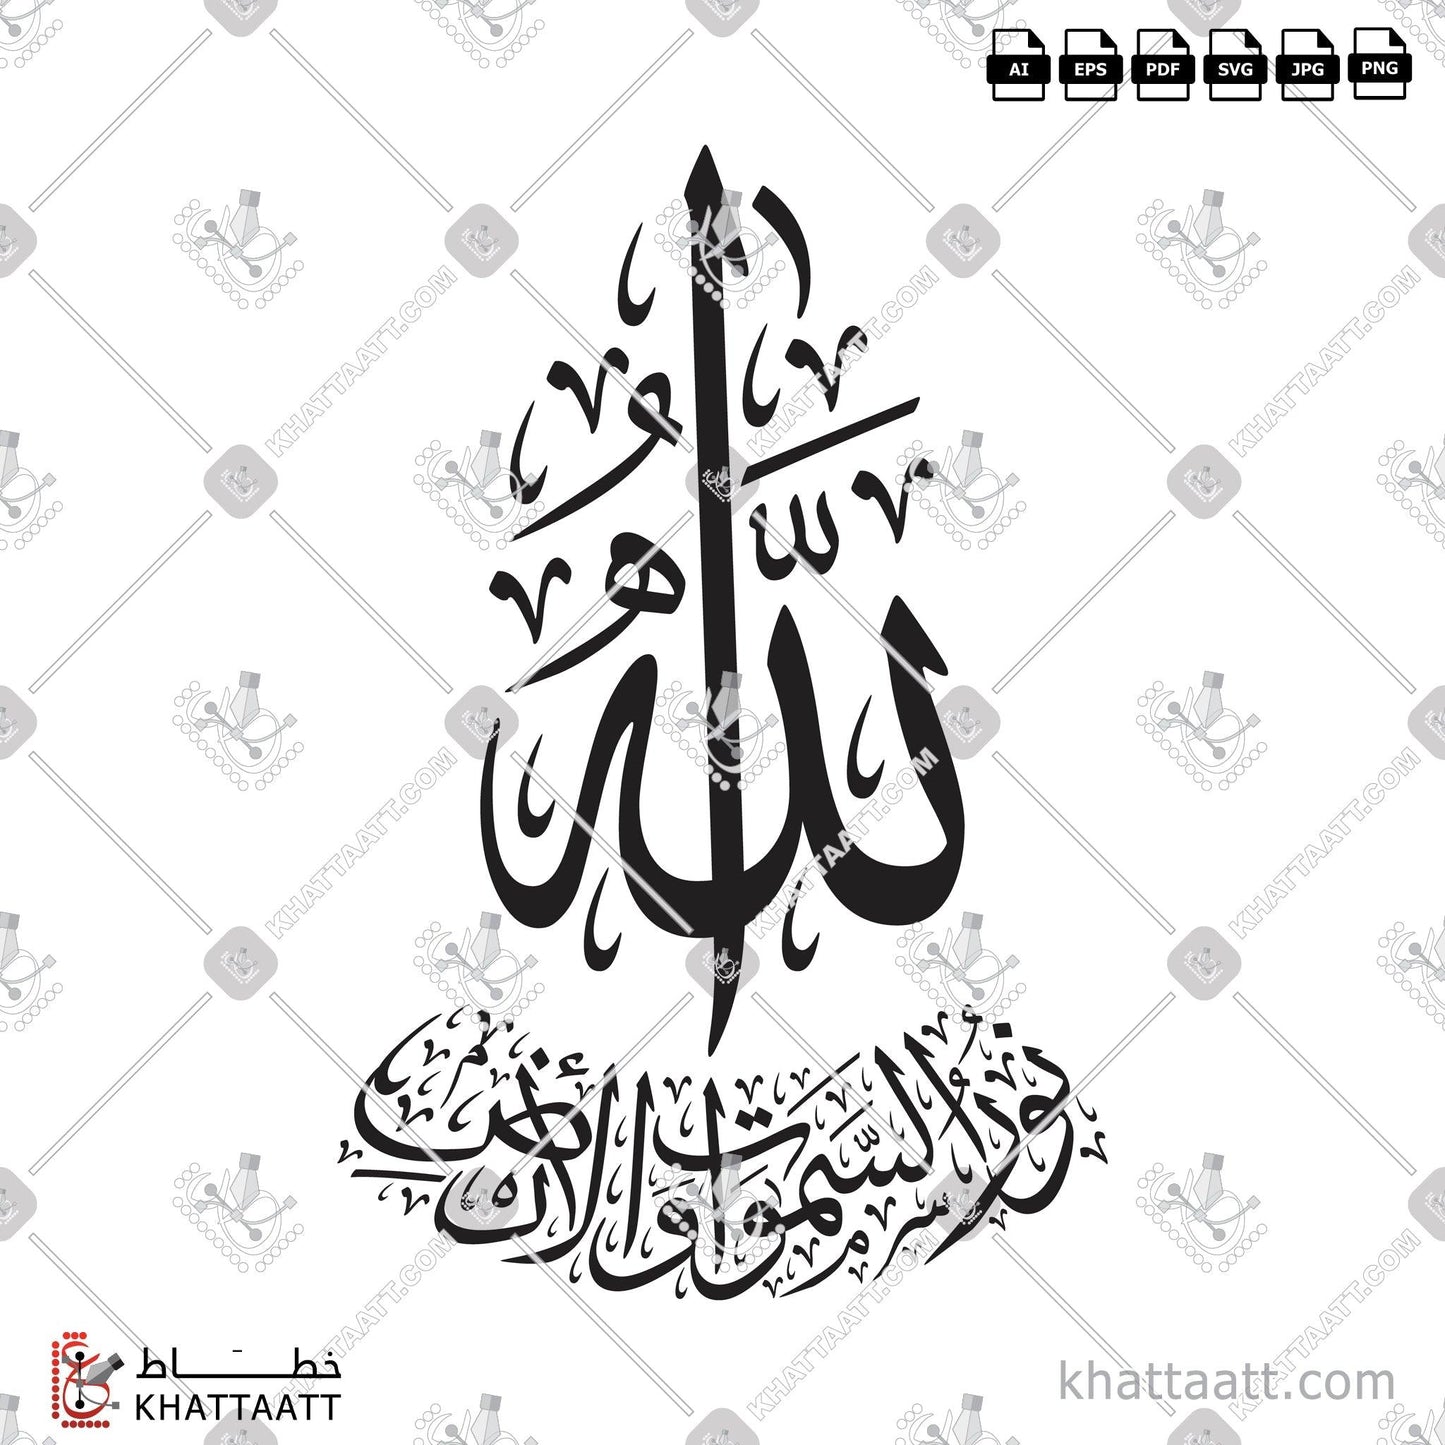 Download Arabic Calligraphy of الله نور السماوات والأرض in Thuluth - خط الثلث in vector and .png